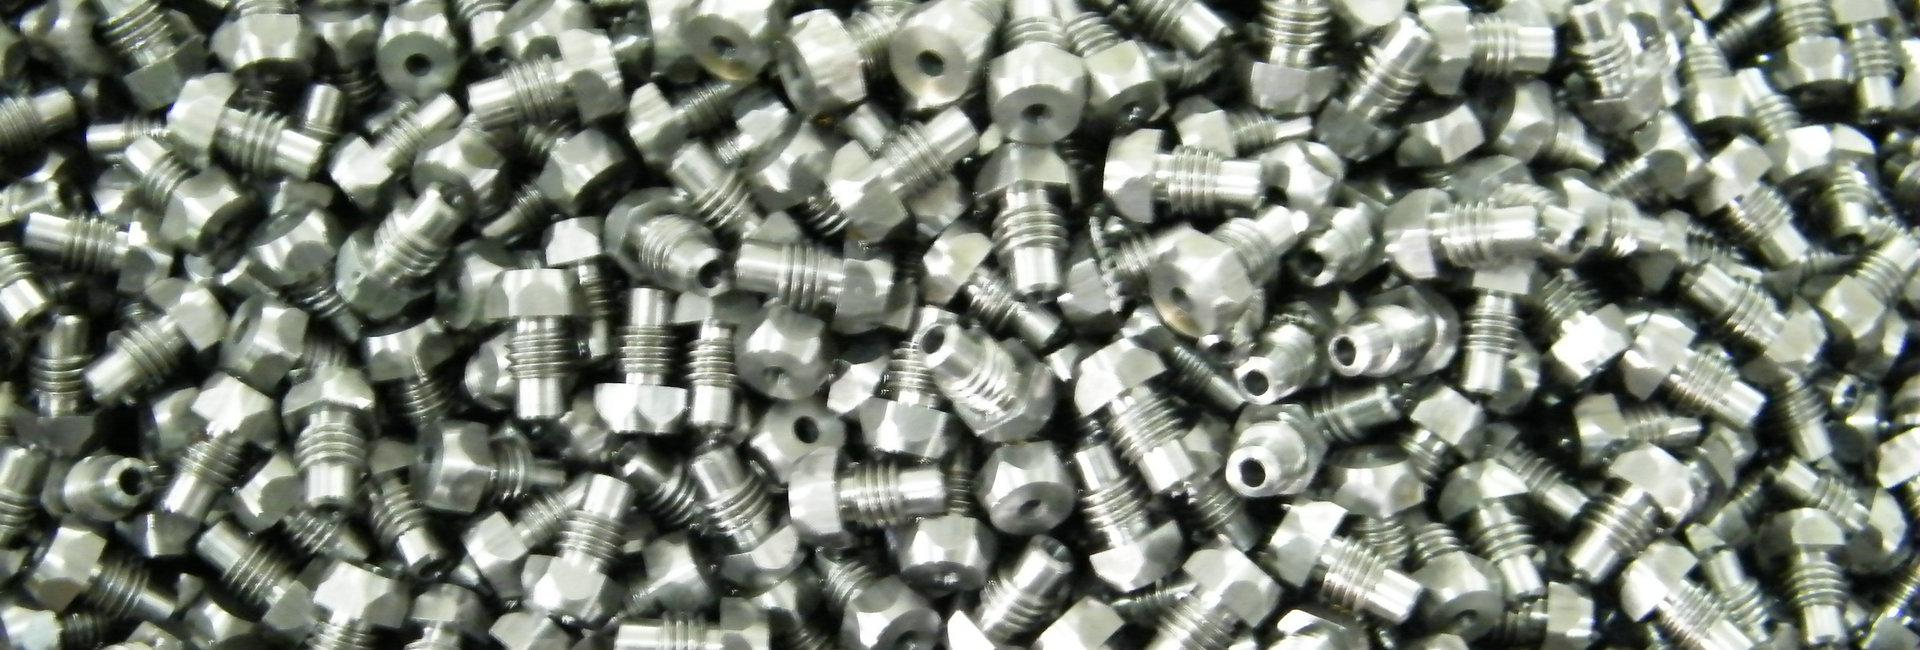 tailor-made precision hex thread turned parts